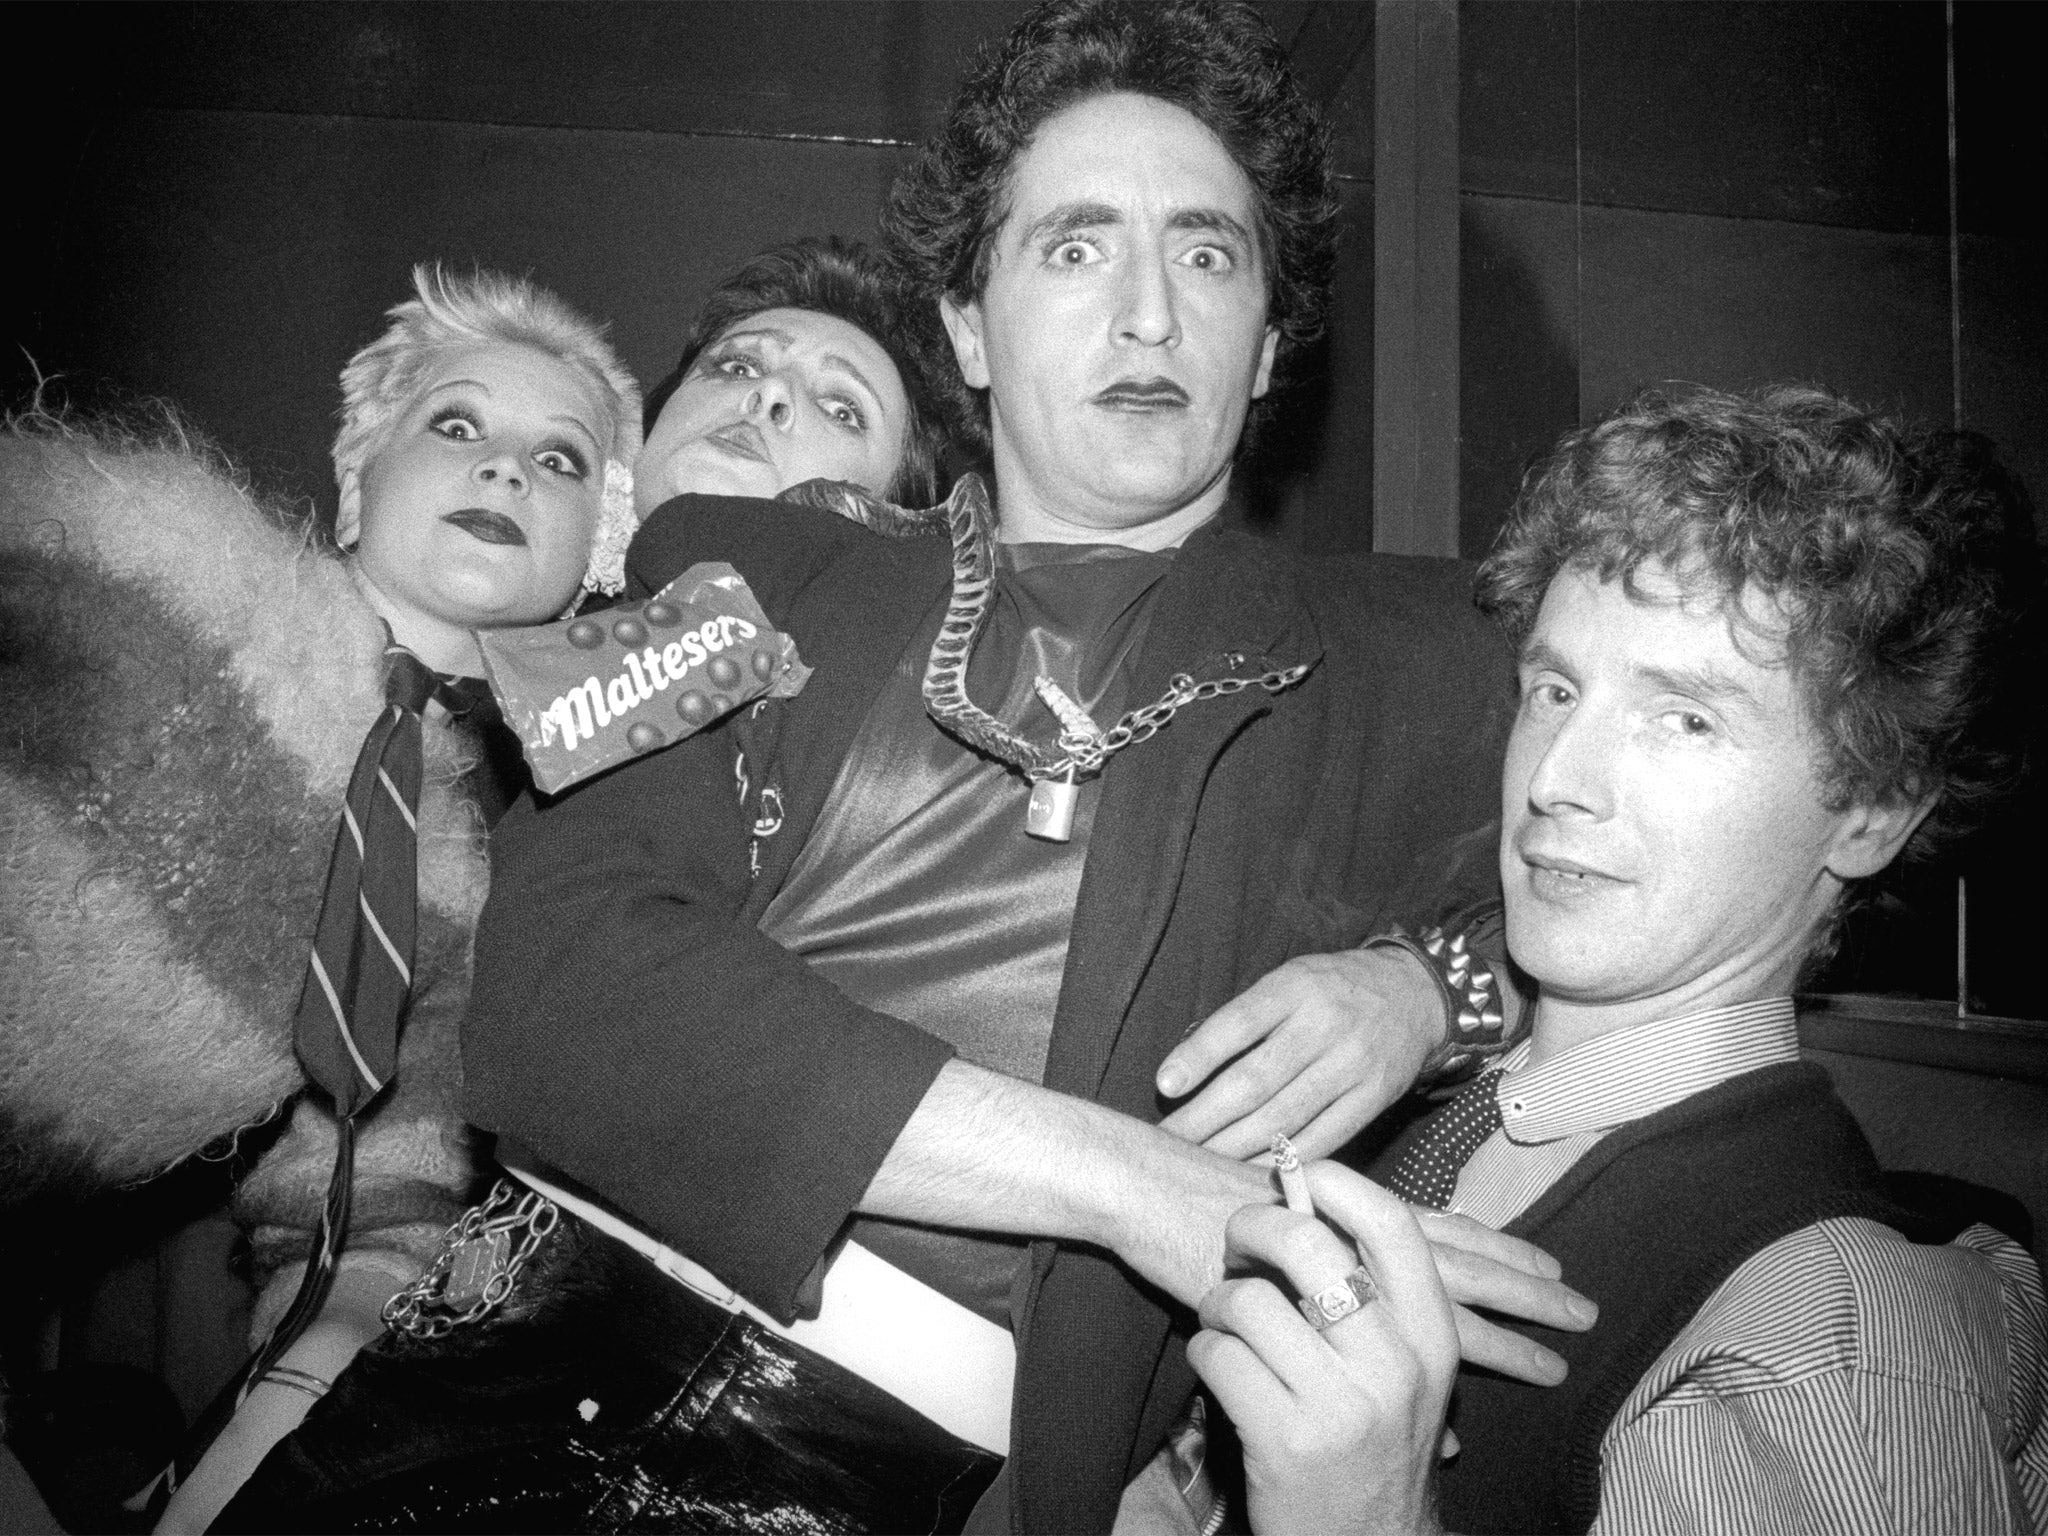 Malcolm McLaren (right) with Pistols fans including Siouxsie Sioux (second left) in 1976